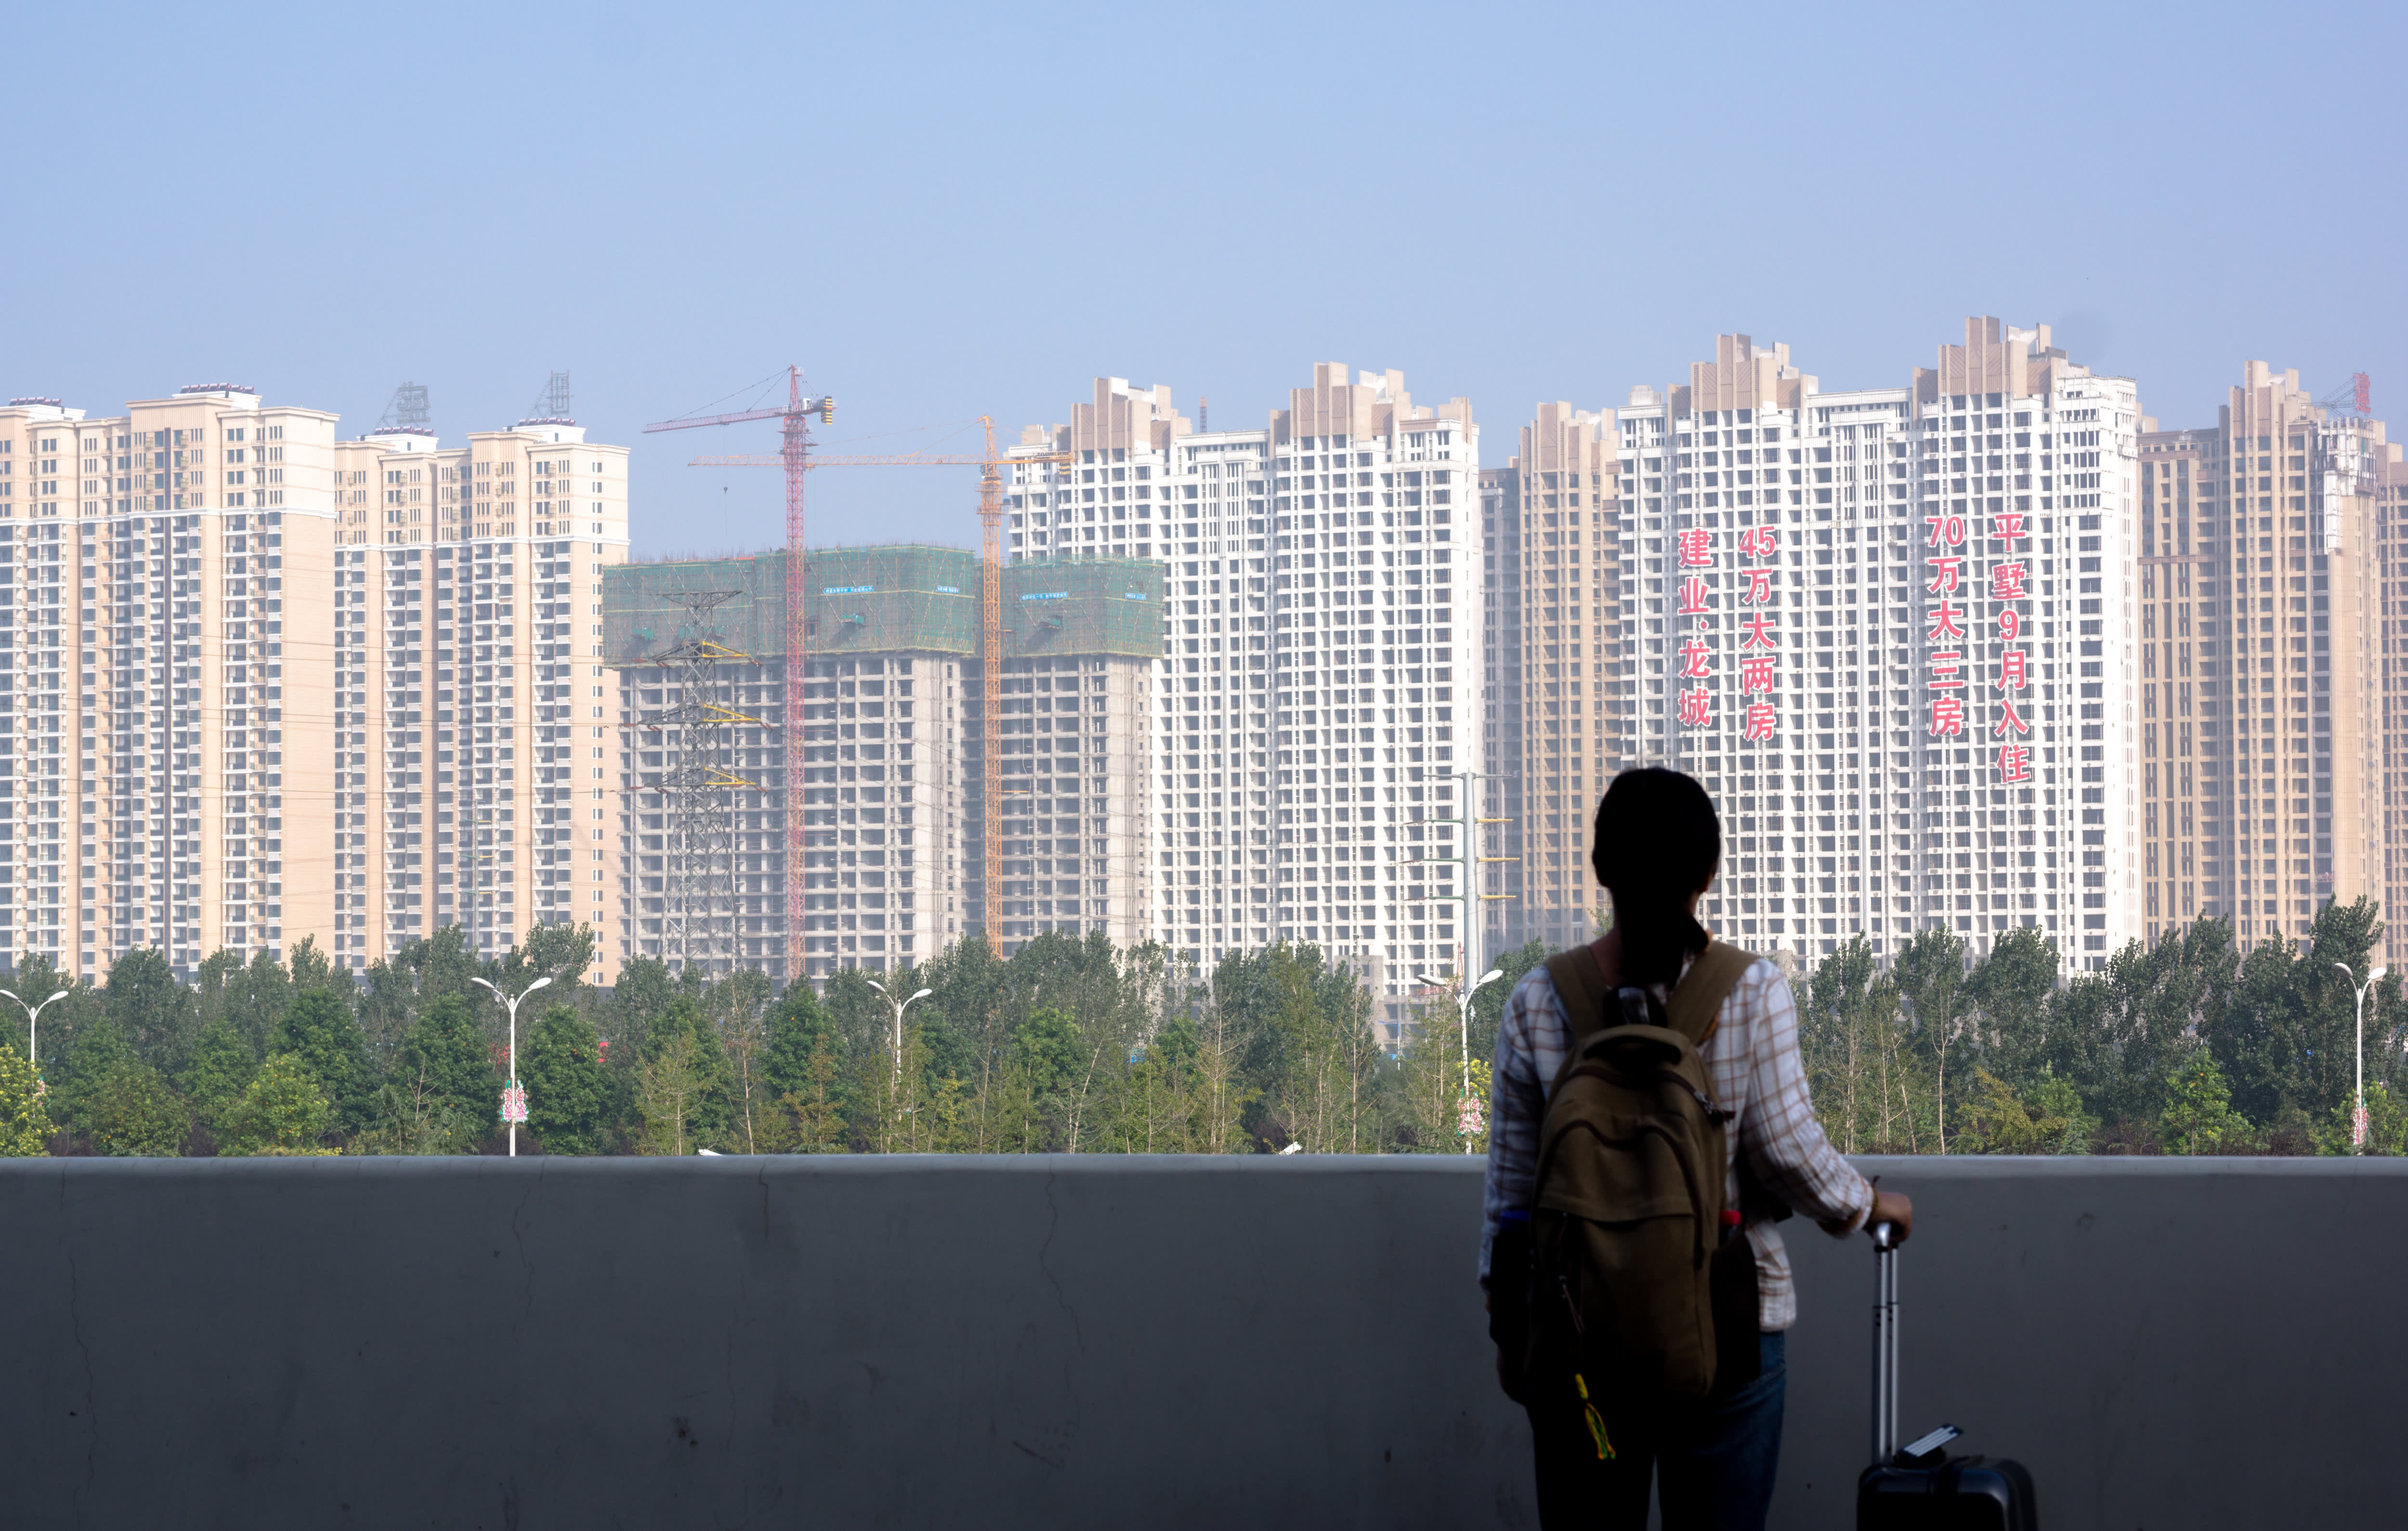 Evergrande is 'just the beginning': Professor says more firms must exit China's property sector